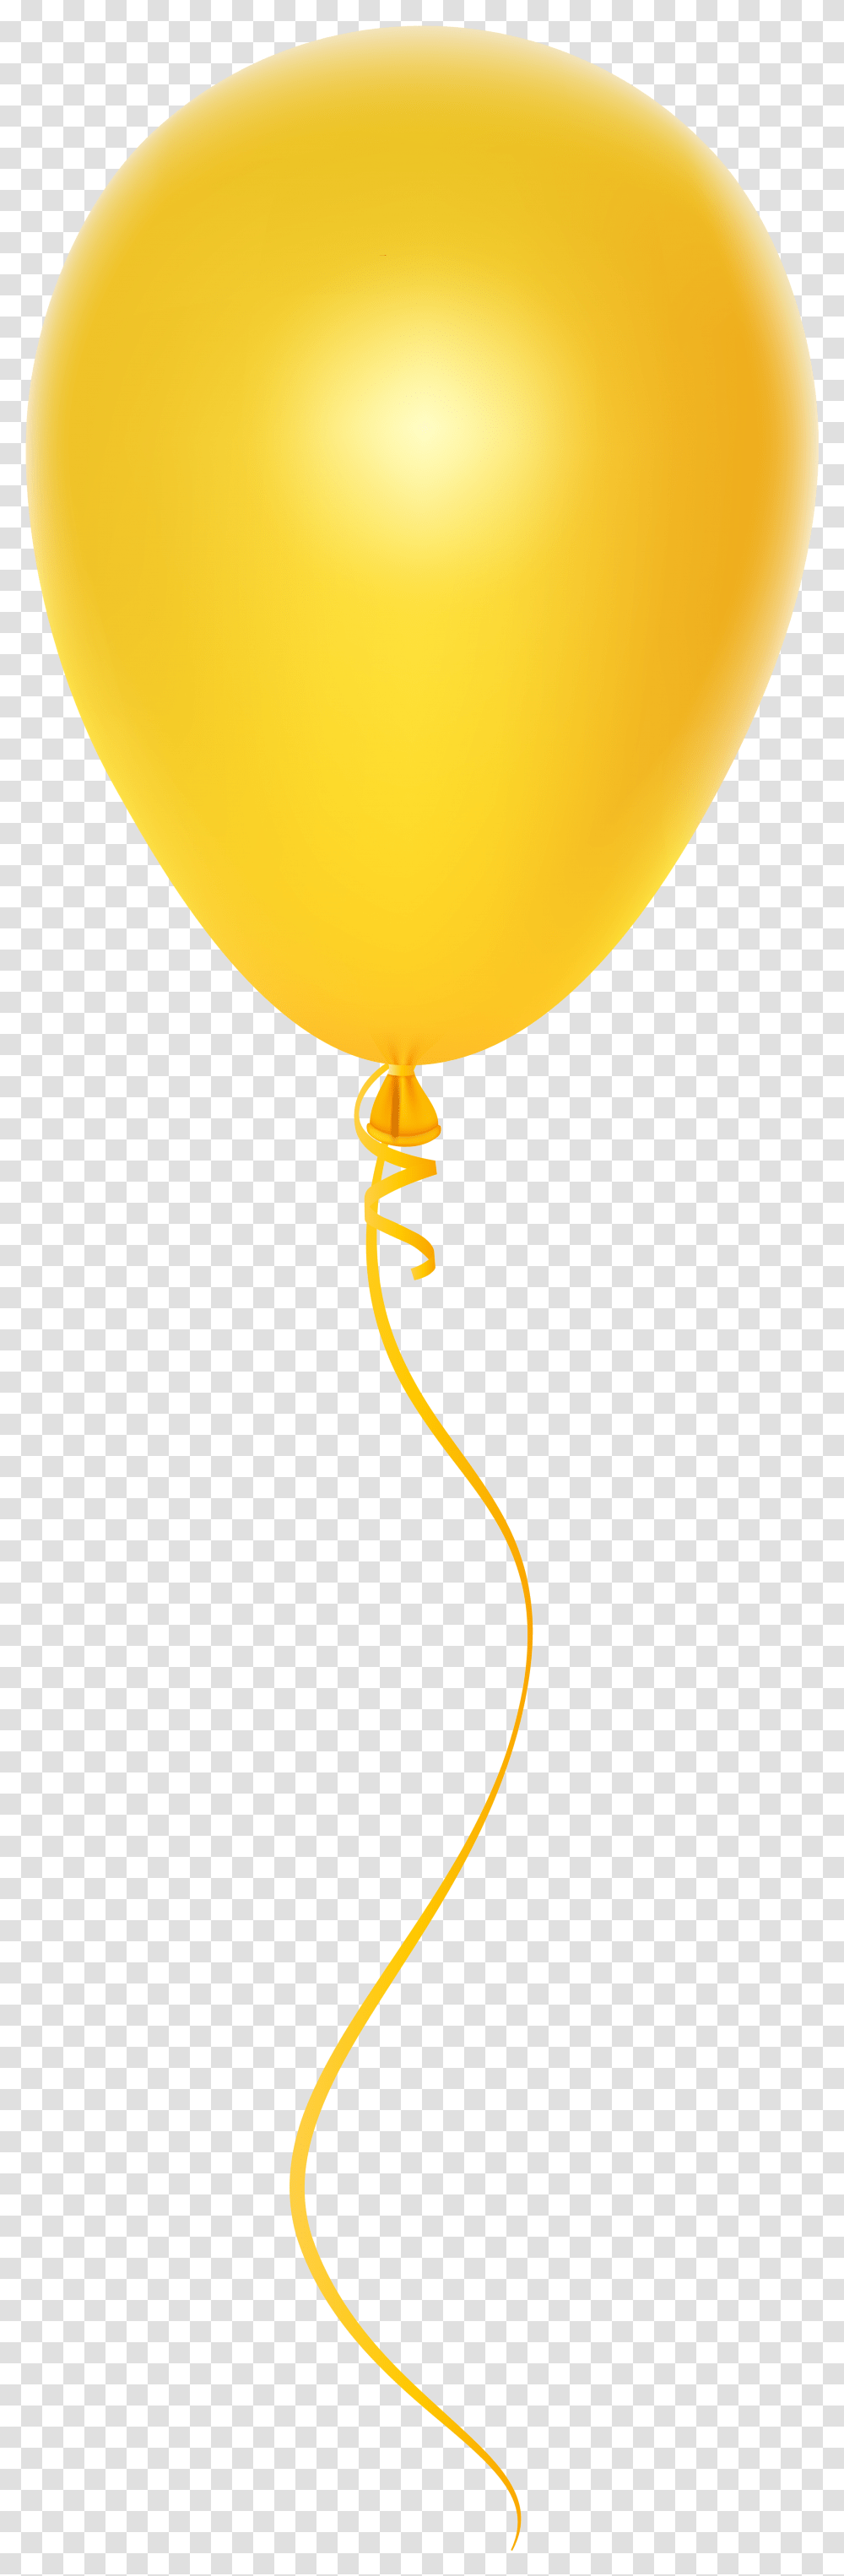 Clipart Gallery Yopriceville High Yellow Balloon Transparent Png